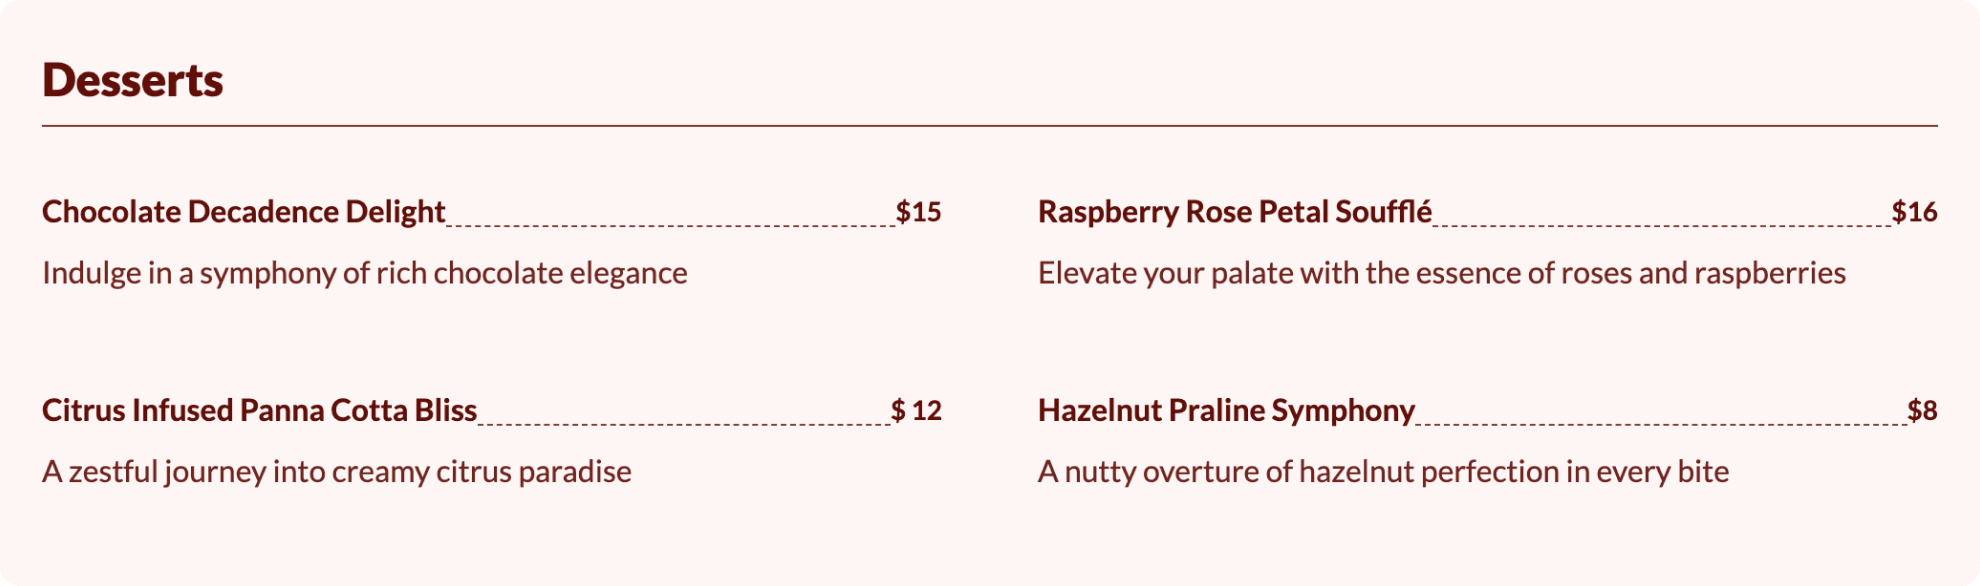 Dessert menu on pink background with red text